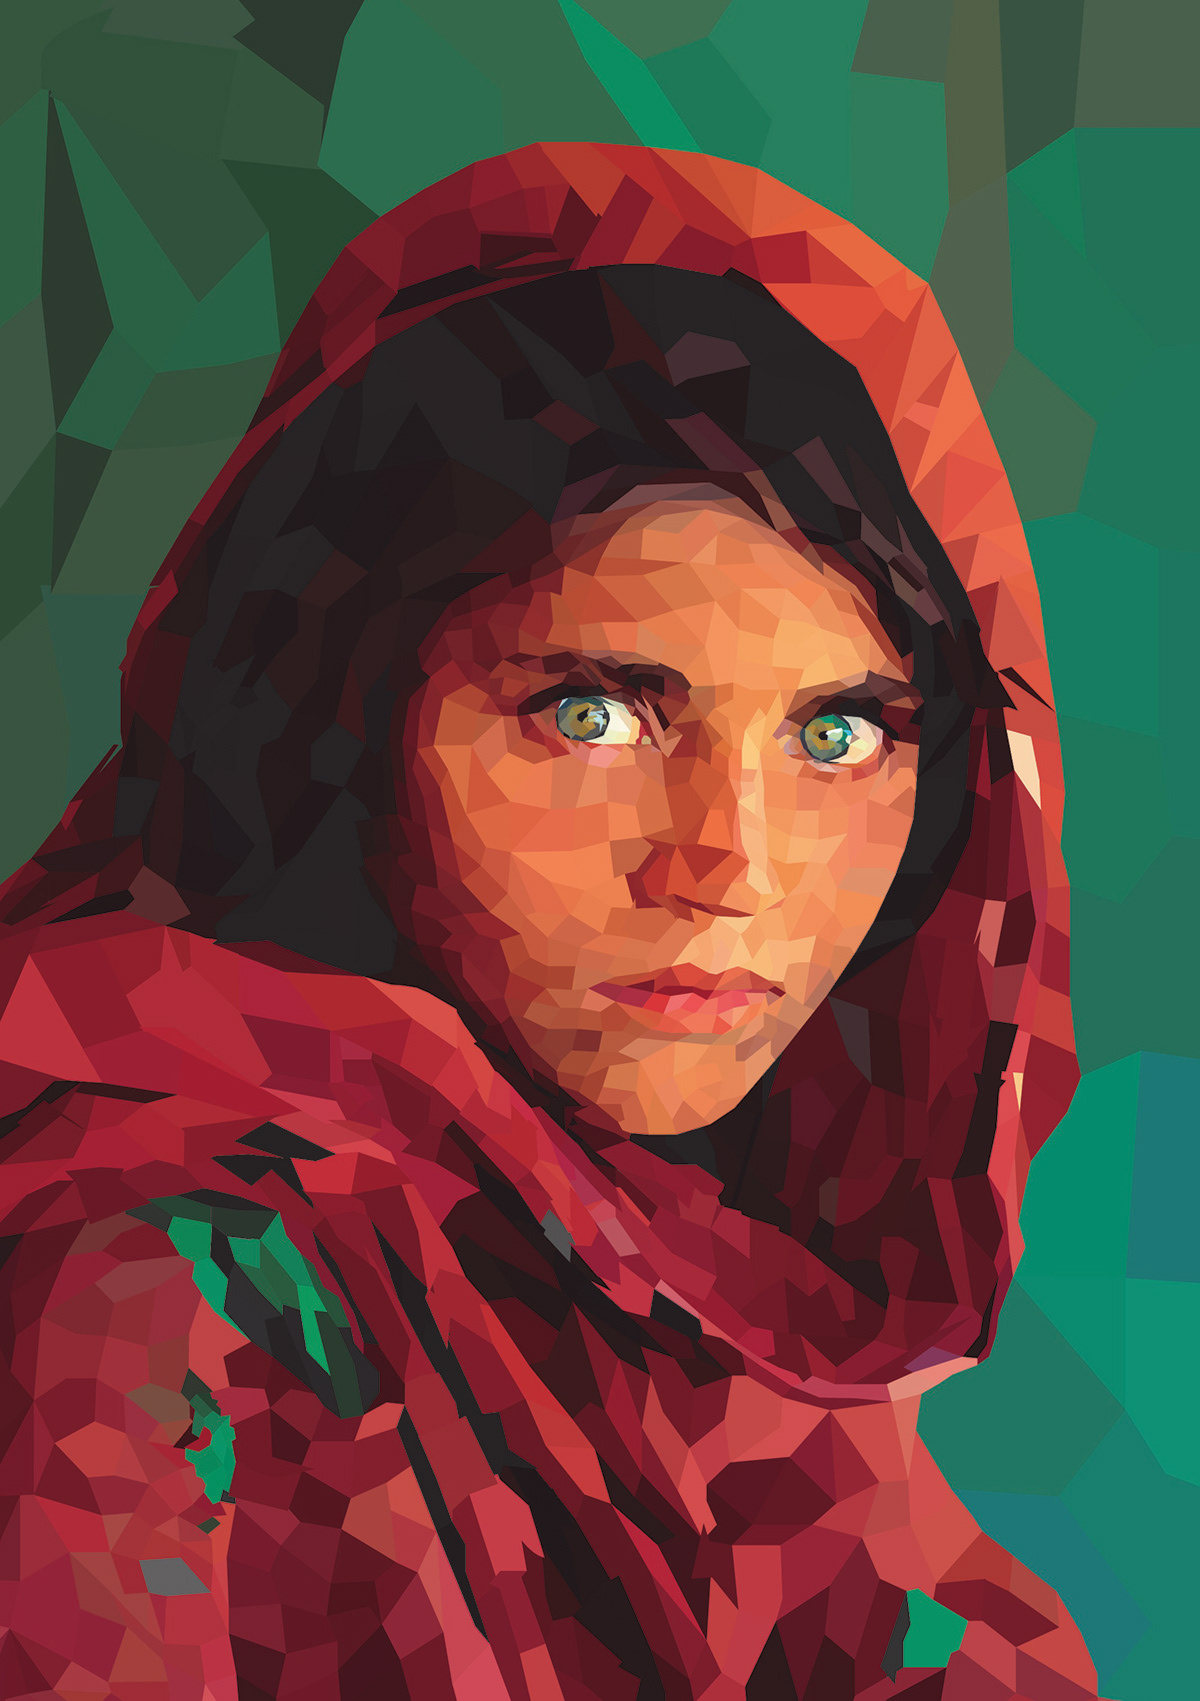 The image is a illustration of the photo Afhegan Girl from Steve McCurry. The woman have green eyes 